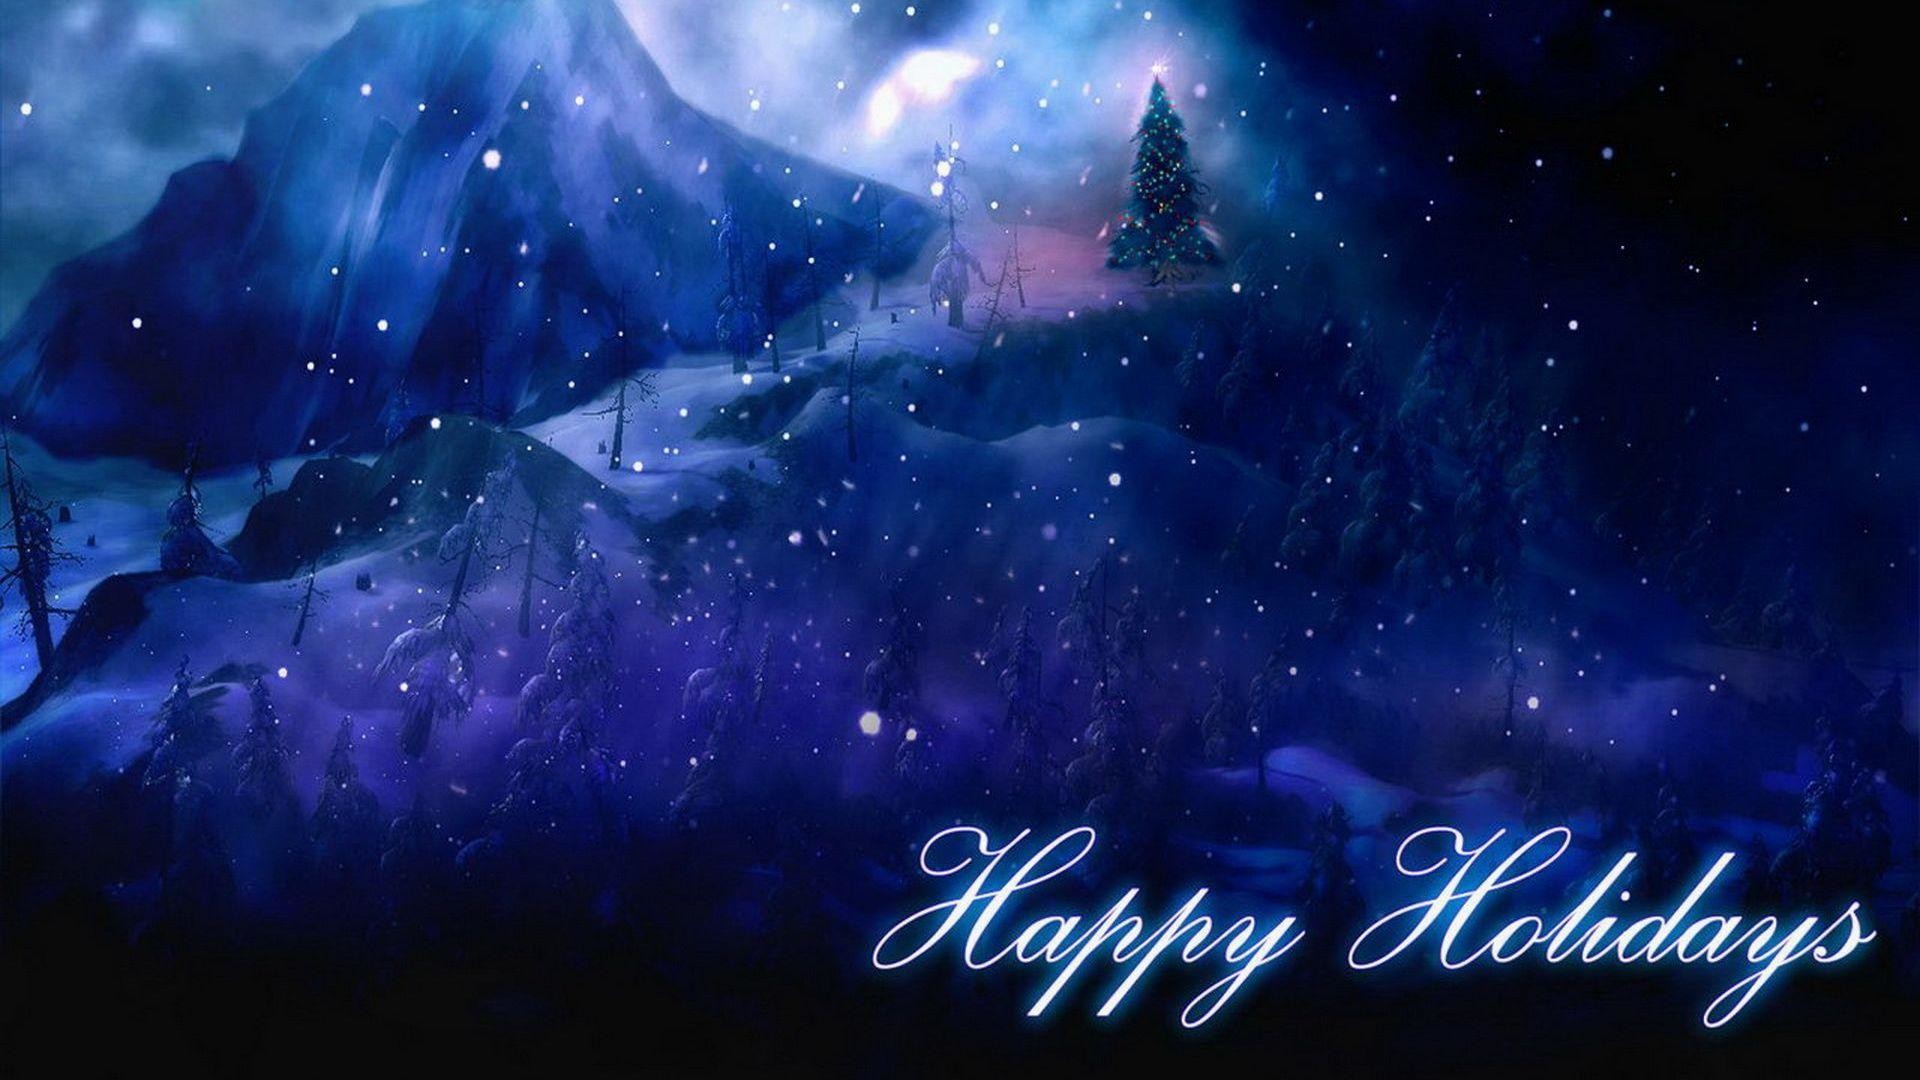 1920x1080 10. holiday wallpapers free10